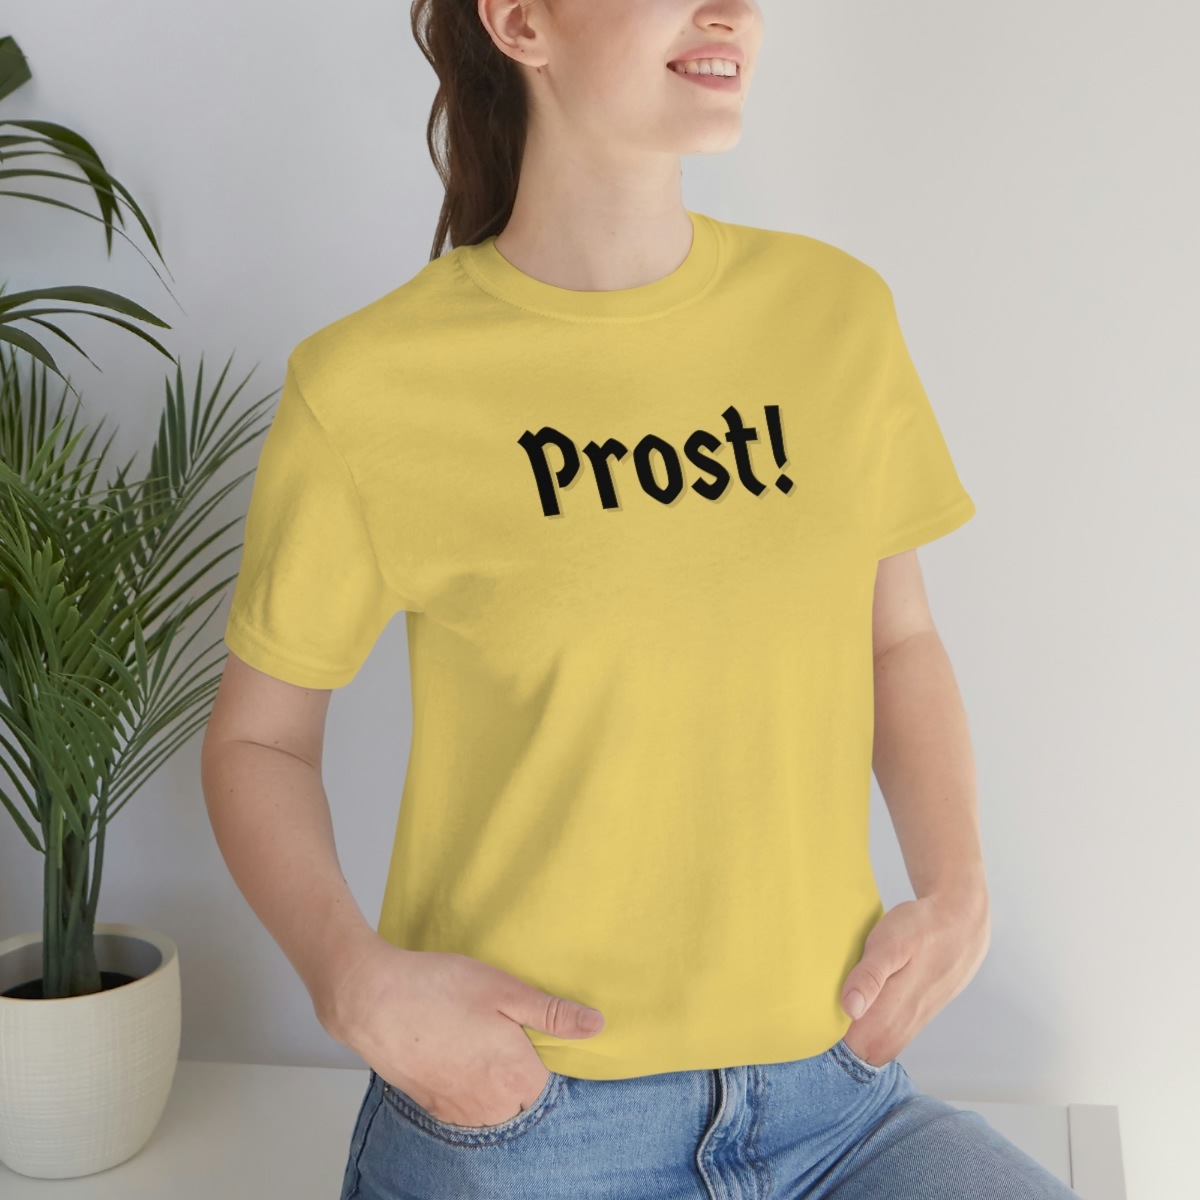 Unisex Prost! Tee Shirt - Available in 10 Colors